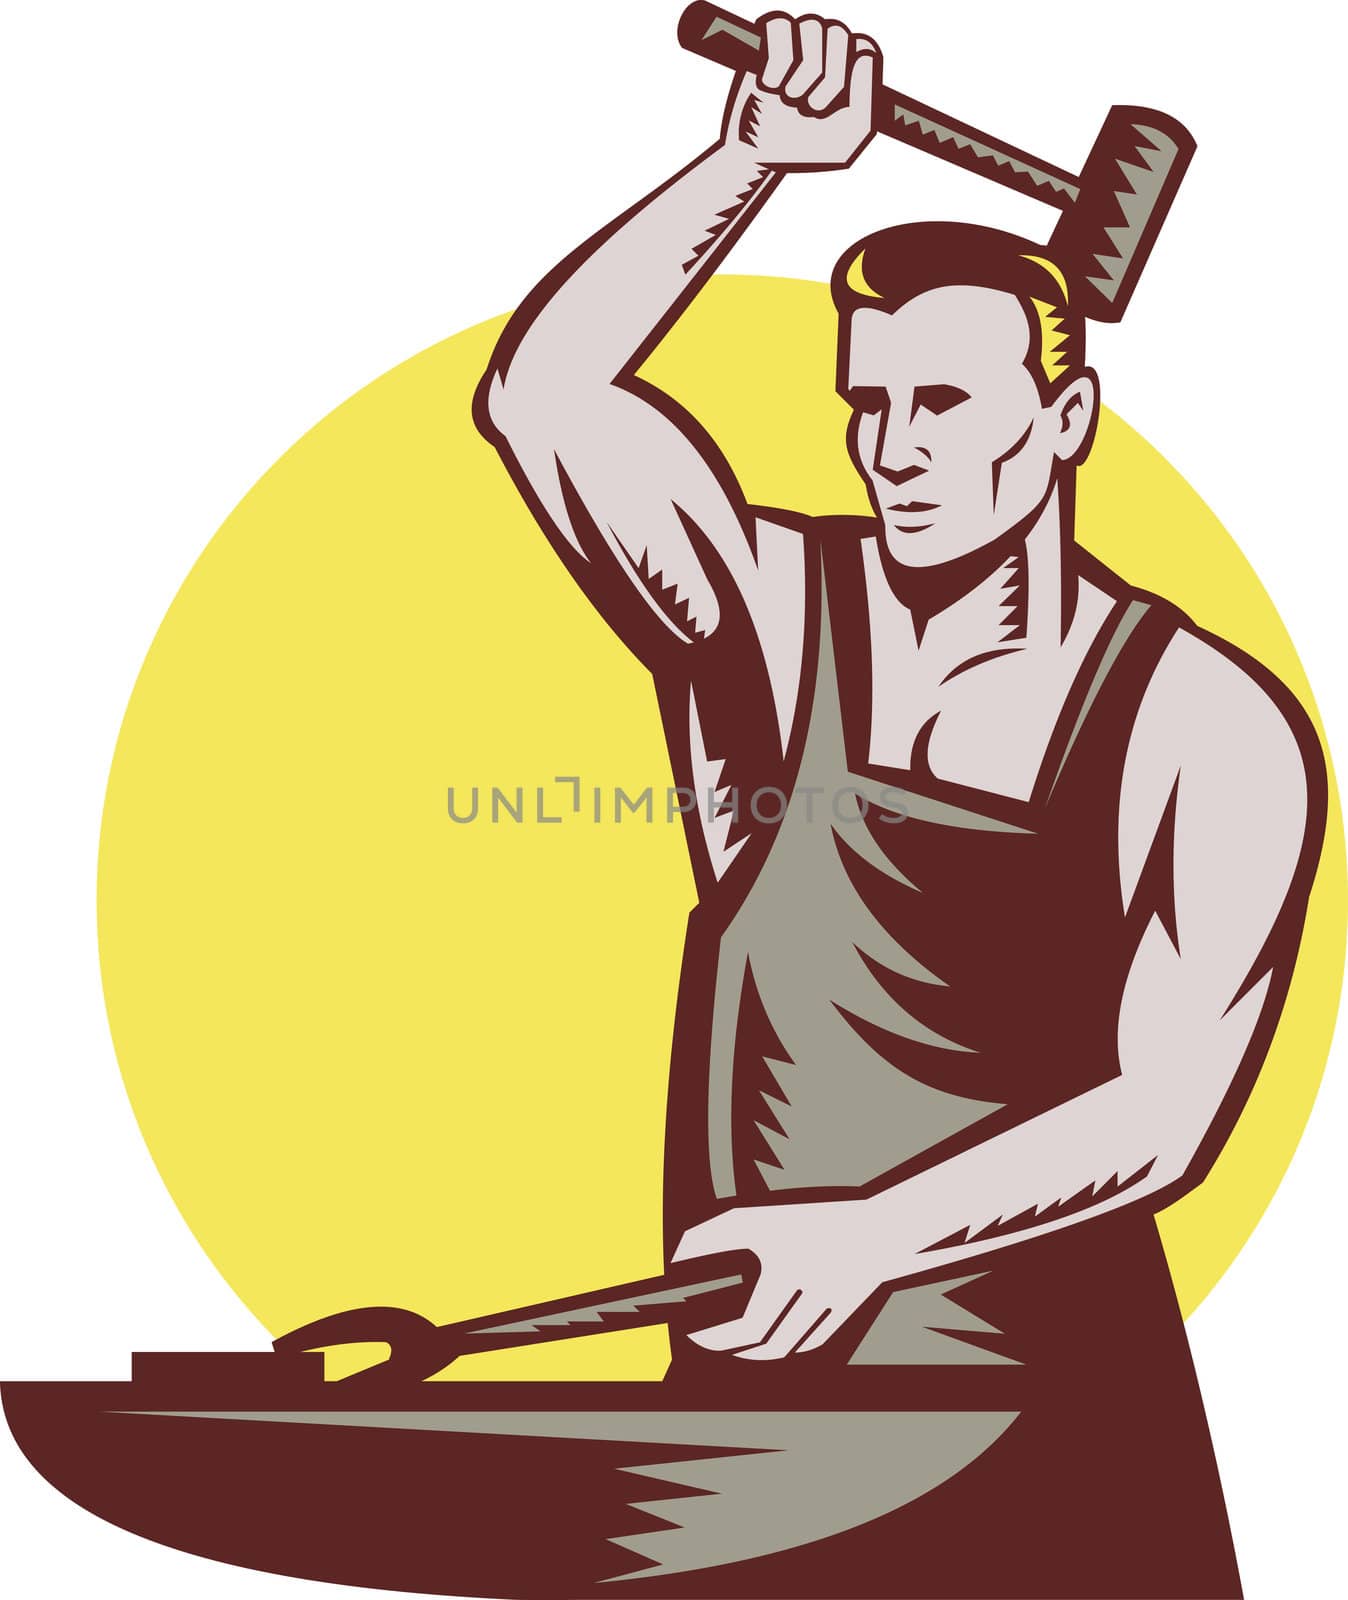 retro style illustration of a male worker or blacksmith striking hammer and anvil with sunburst